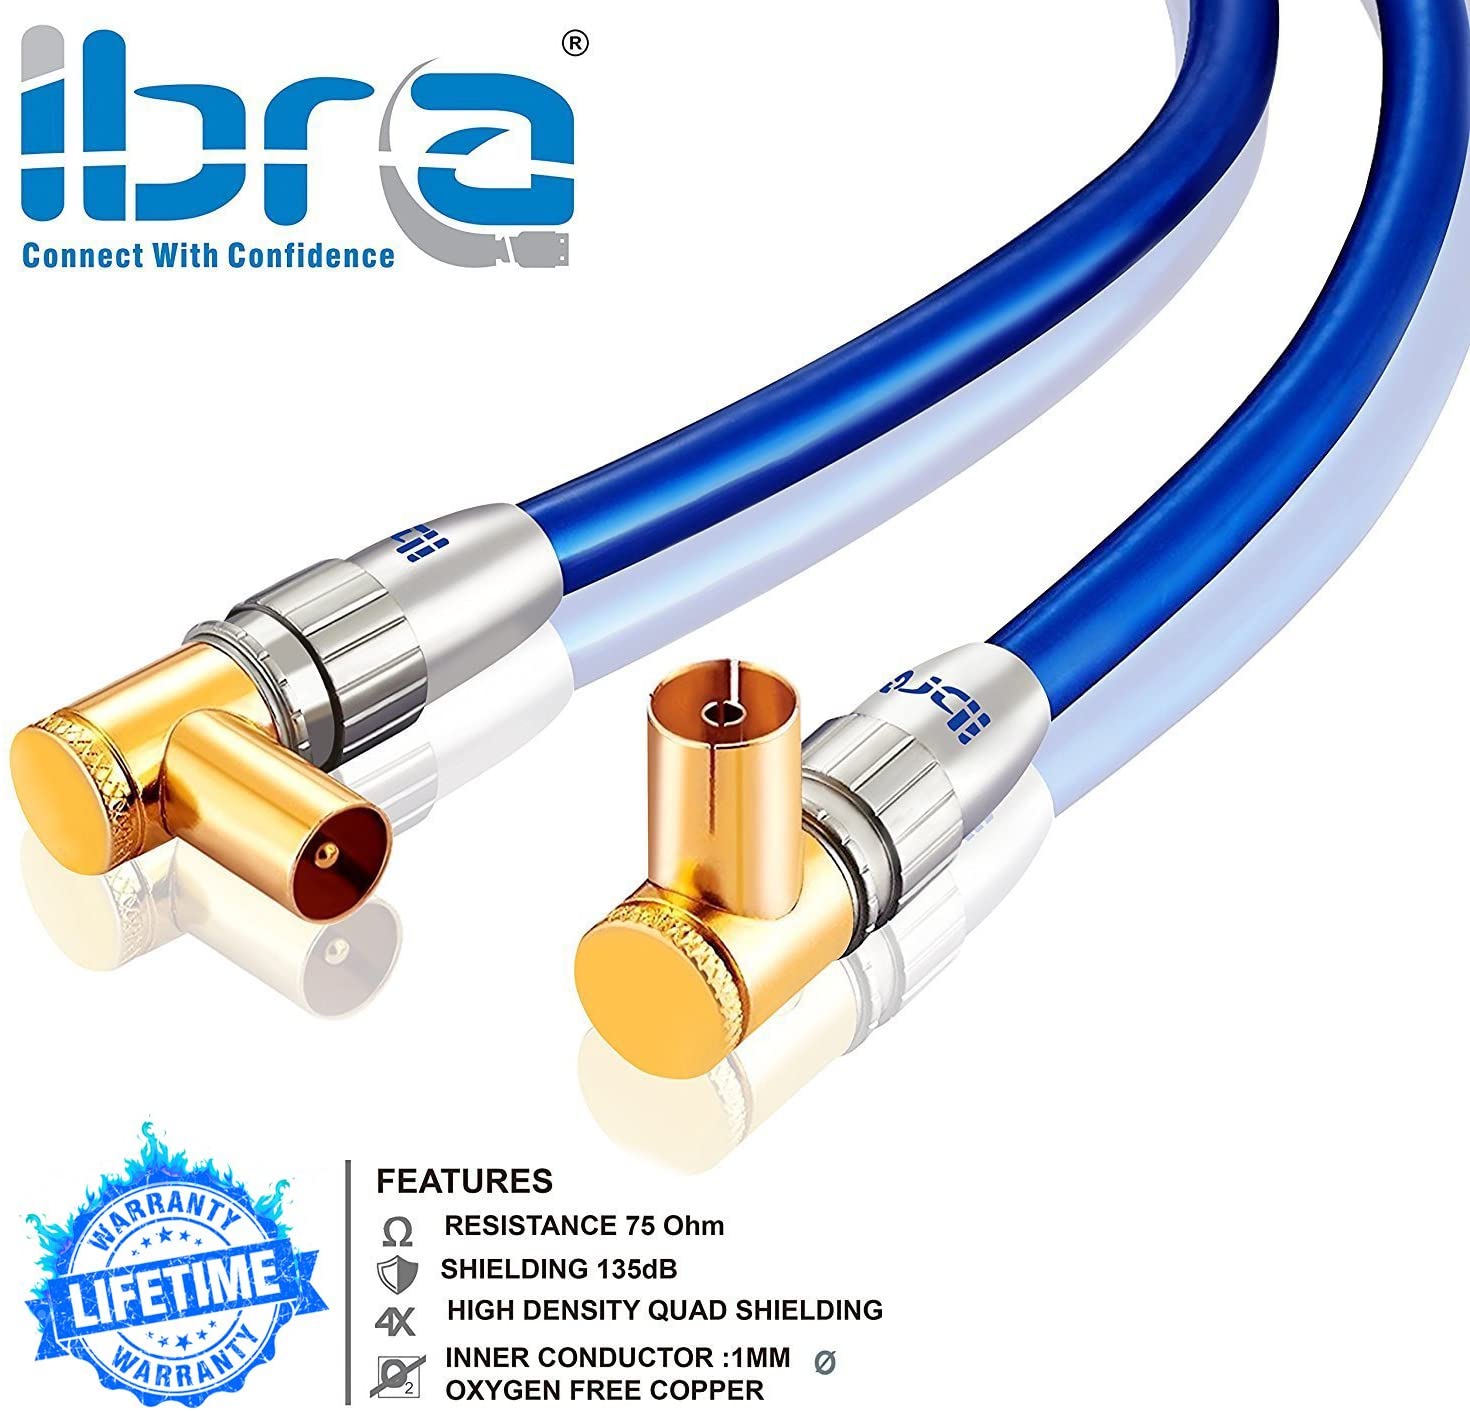 10m IBRA HDTV Antenna Cable | TV Aerial Cable with 90 Degree Right Angled Connectors | Premium Freeview Coaxial Cable | 90° Angled Connectors: Coax Male to Female |For UHV/UHF/RF DVB-T1/T2